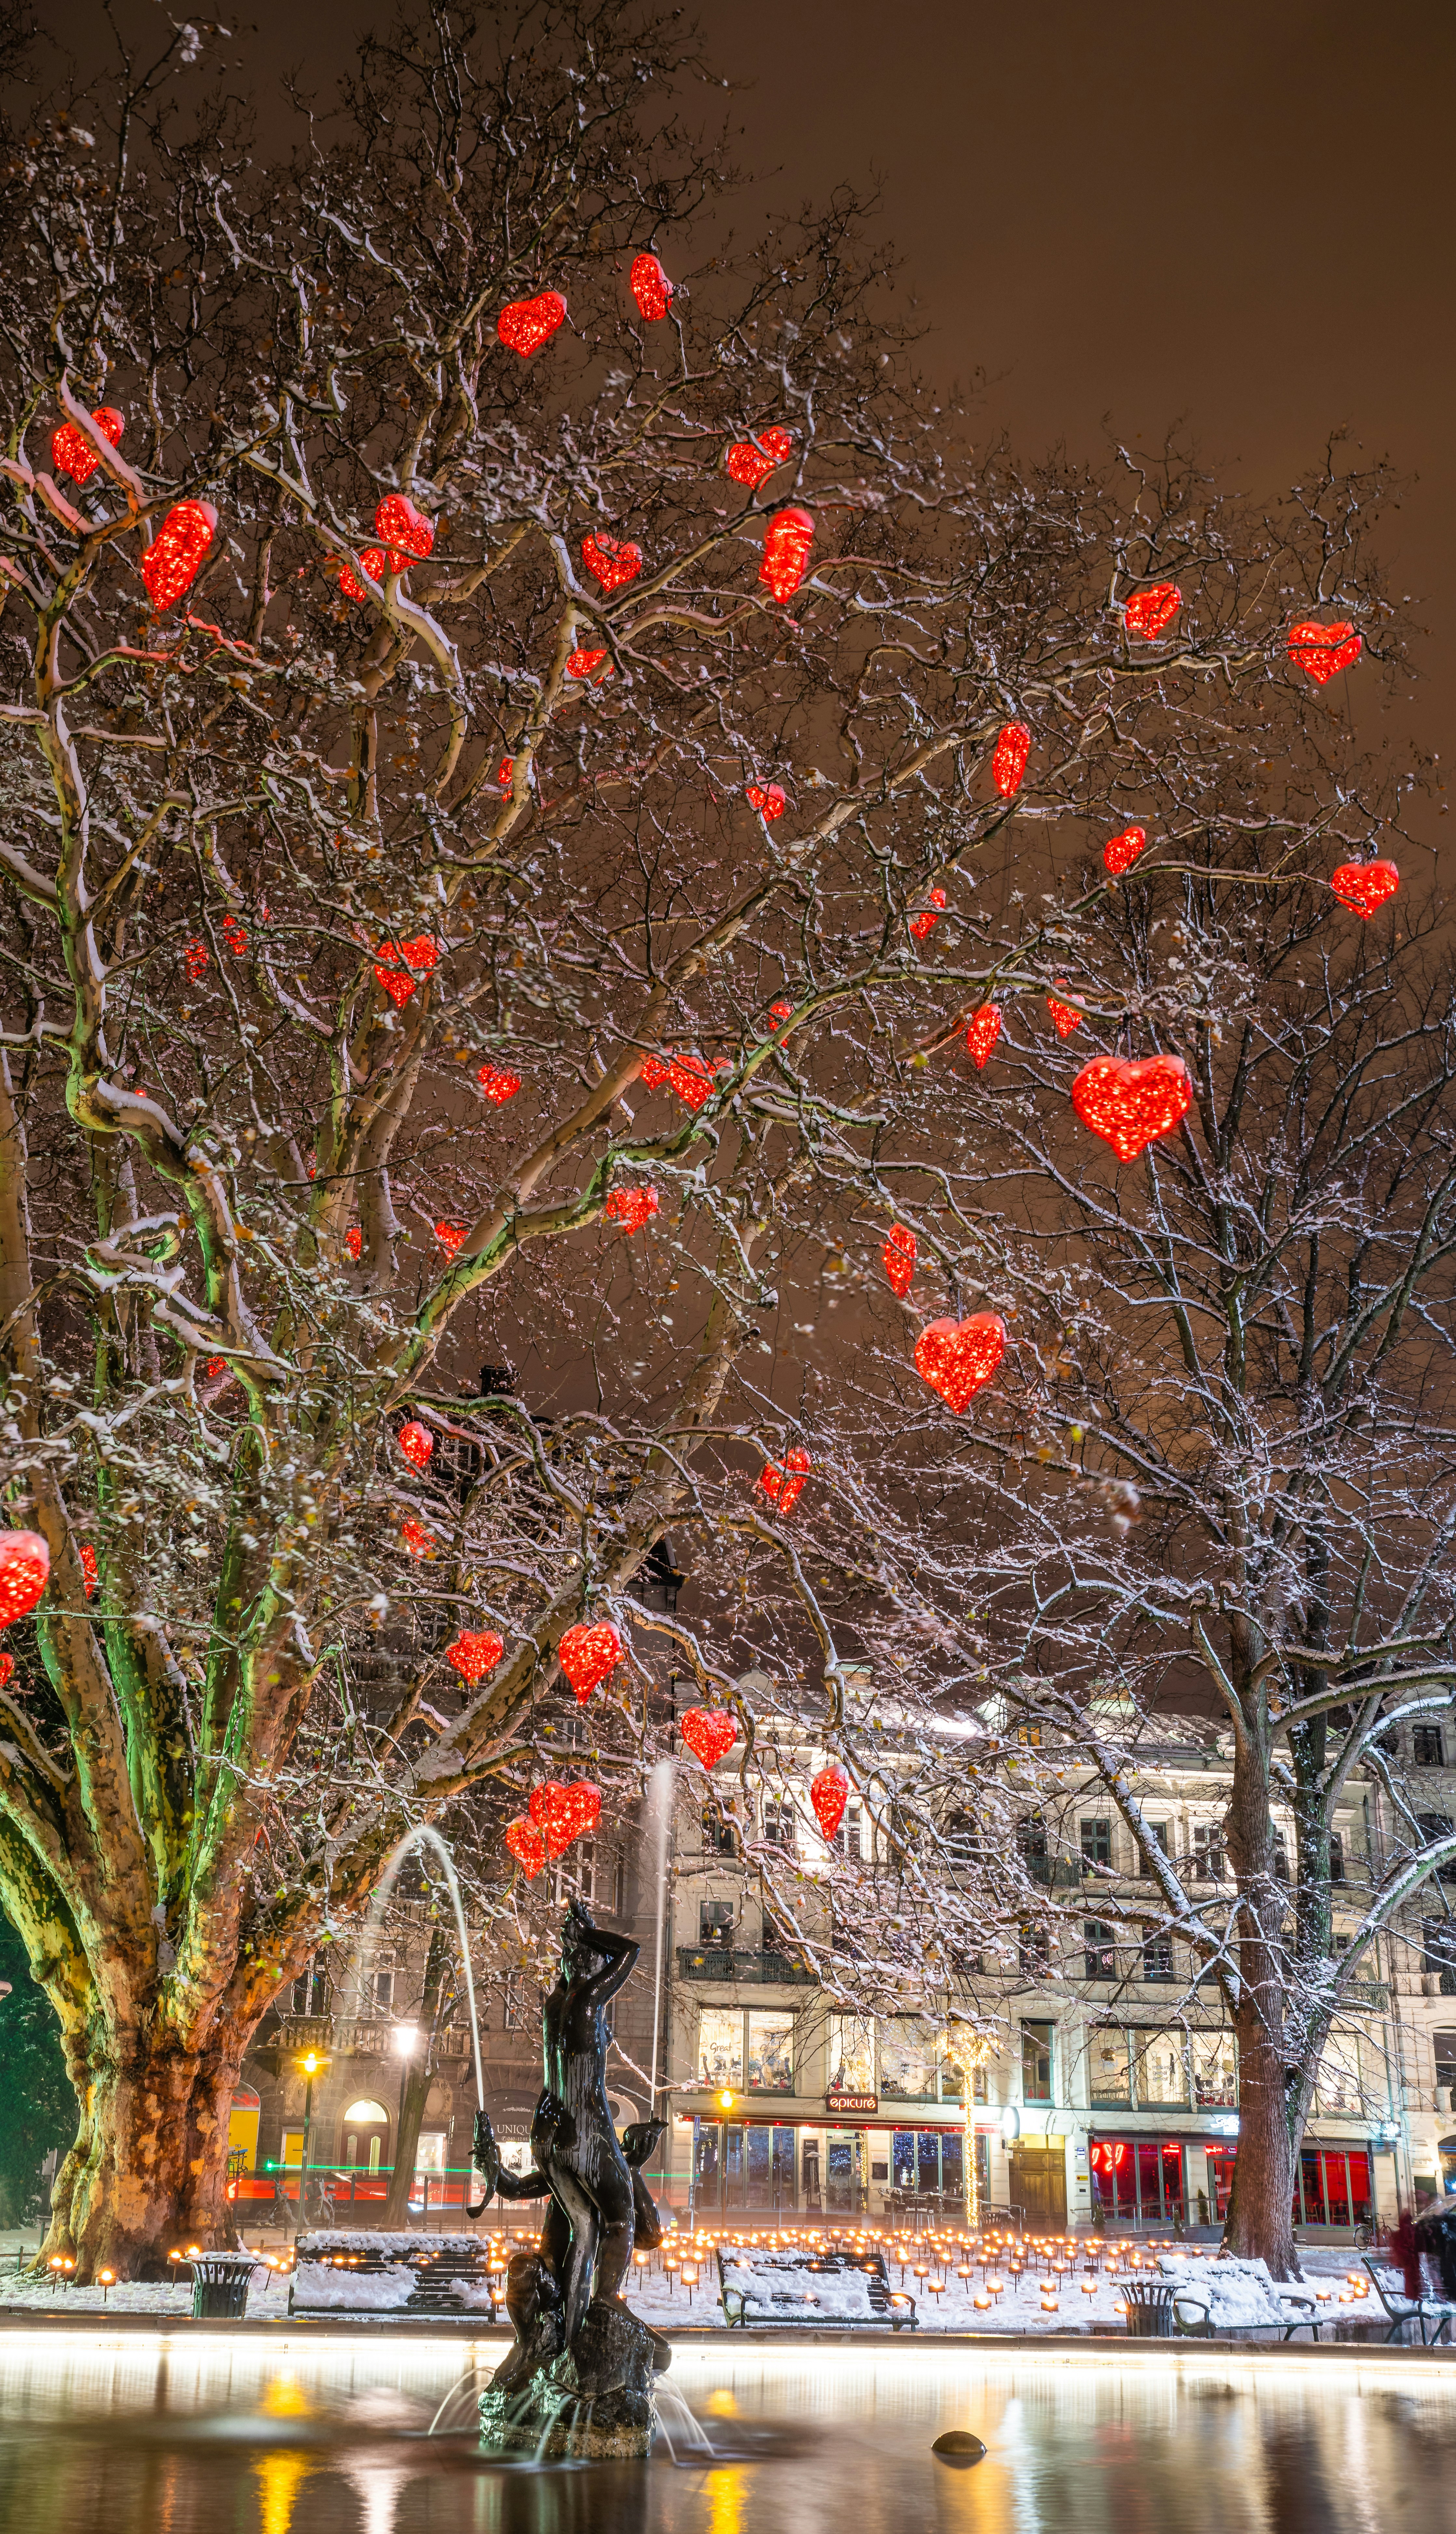 The tree of love filled with red hearts stands at Gusav Adolf's Sq in Malmöat christmas time